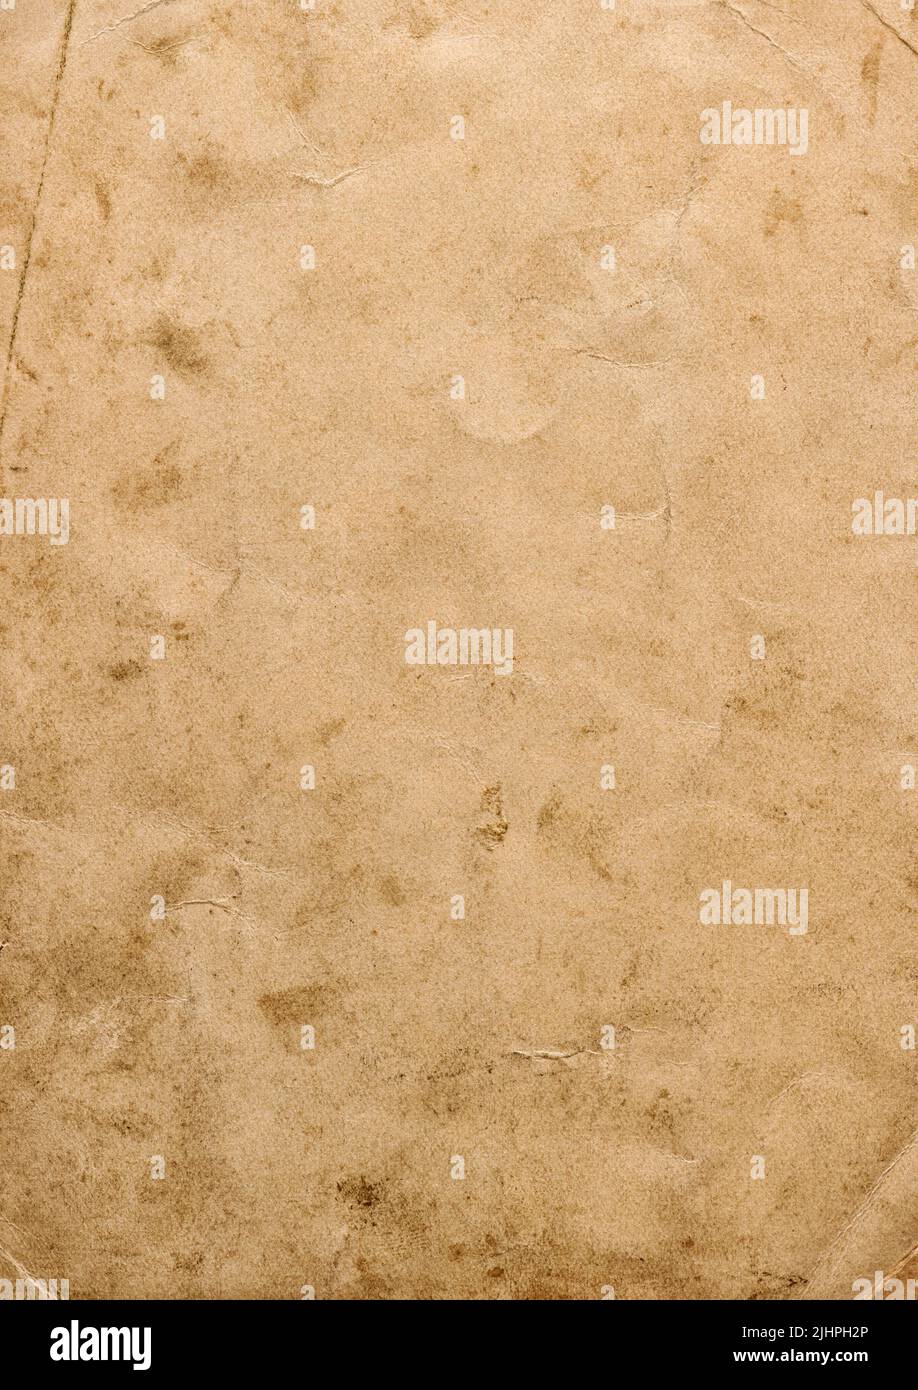 Old paper texture background with stains Stock Photo